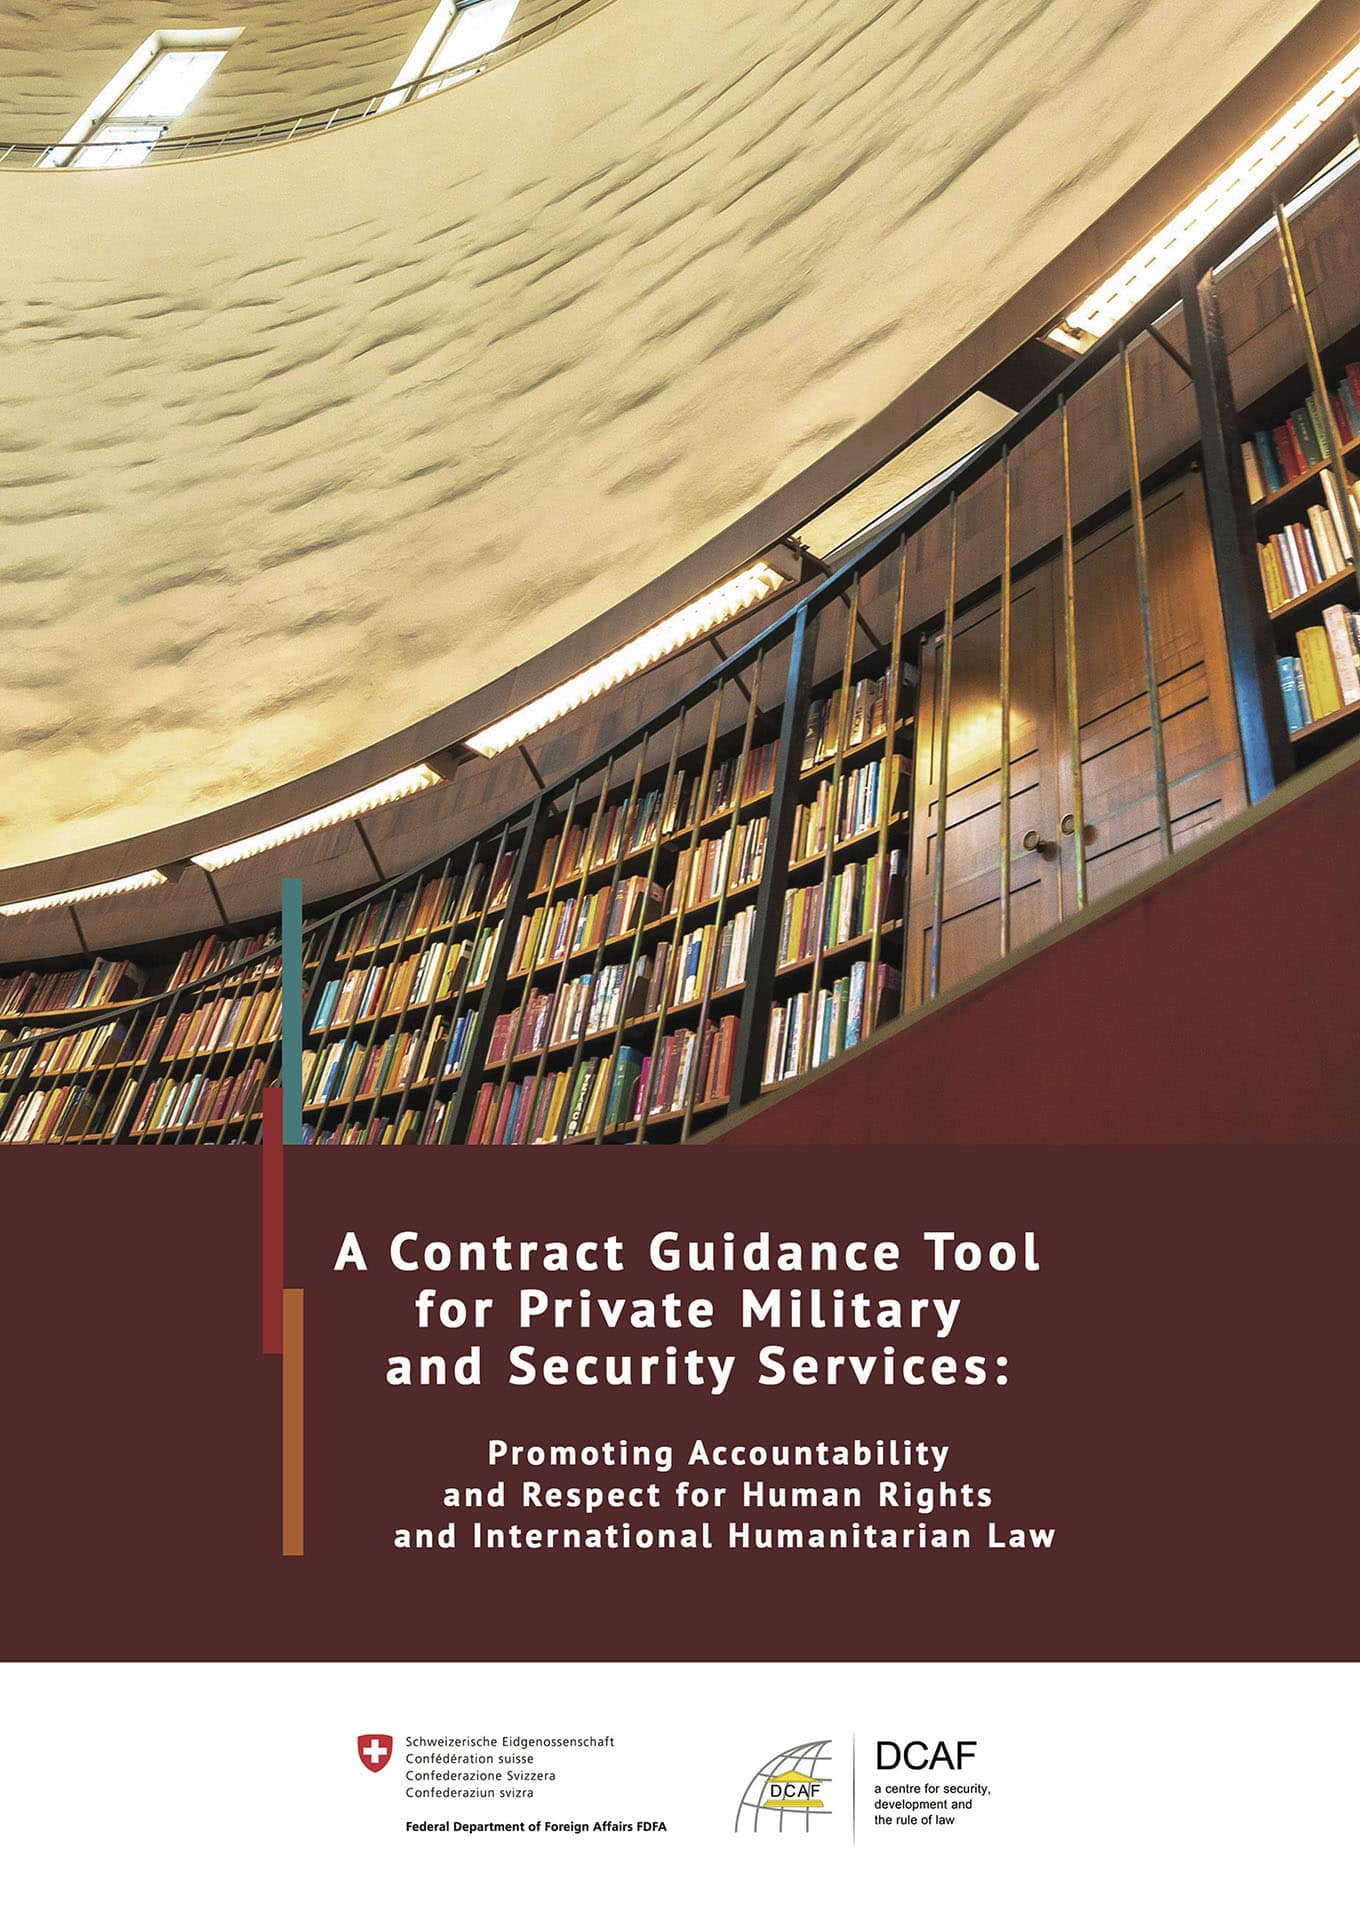 A Contract Guidance Tool for Private Military and Security Services (DCAF, 2017)